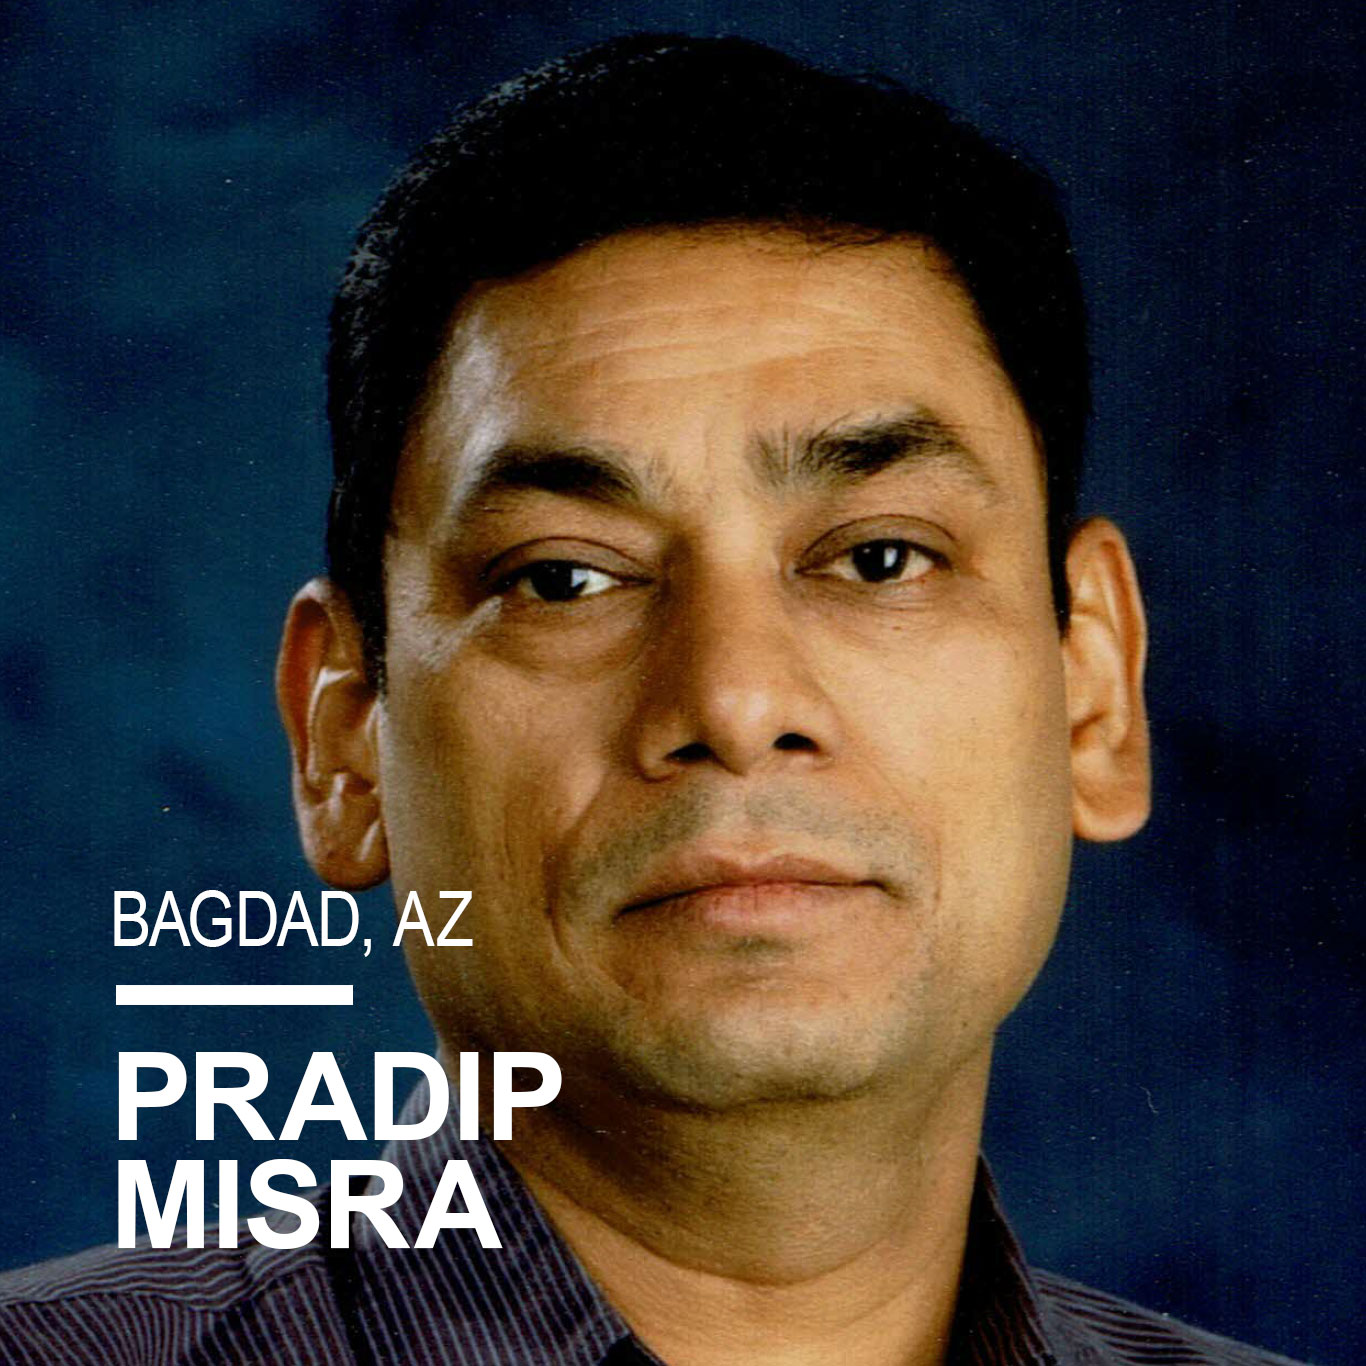 Pradip Misra teaches physics, chemistry, engineering, and robotics for Grades 6-12 at Bagdad Middle and High School in Bagdad, AZ. He has a bachelor of education degree in Science and Math Education, a bachelor of science in Physics, Chemistry, and Math, and a master’s in Physics, and is working on his doctorate in Education. In 2021, he received the Arizona Environmental Education Award and was named Chemistry Teacher of the Year. Pradip loves using hands-on activities to teach because of the exciting, engaging, and constructive ways in which students can learn about the world around them. 